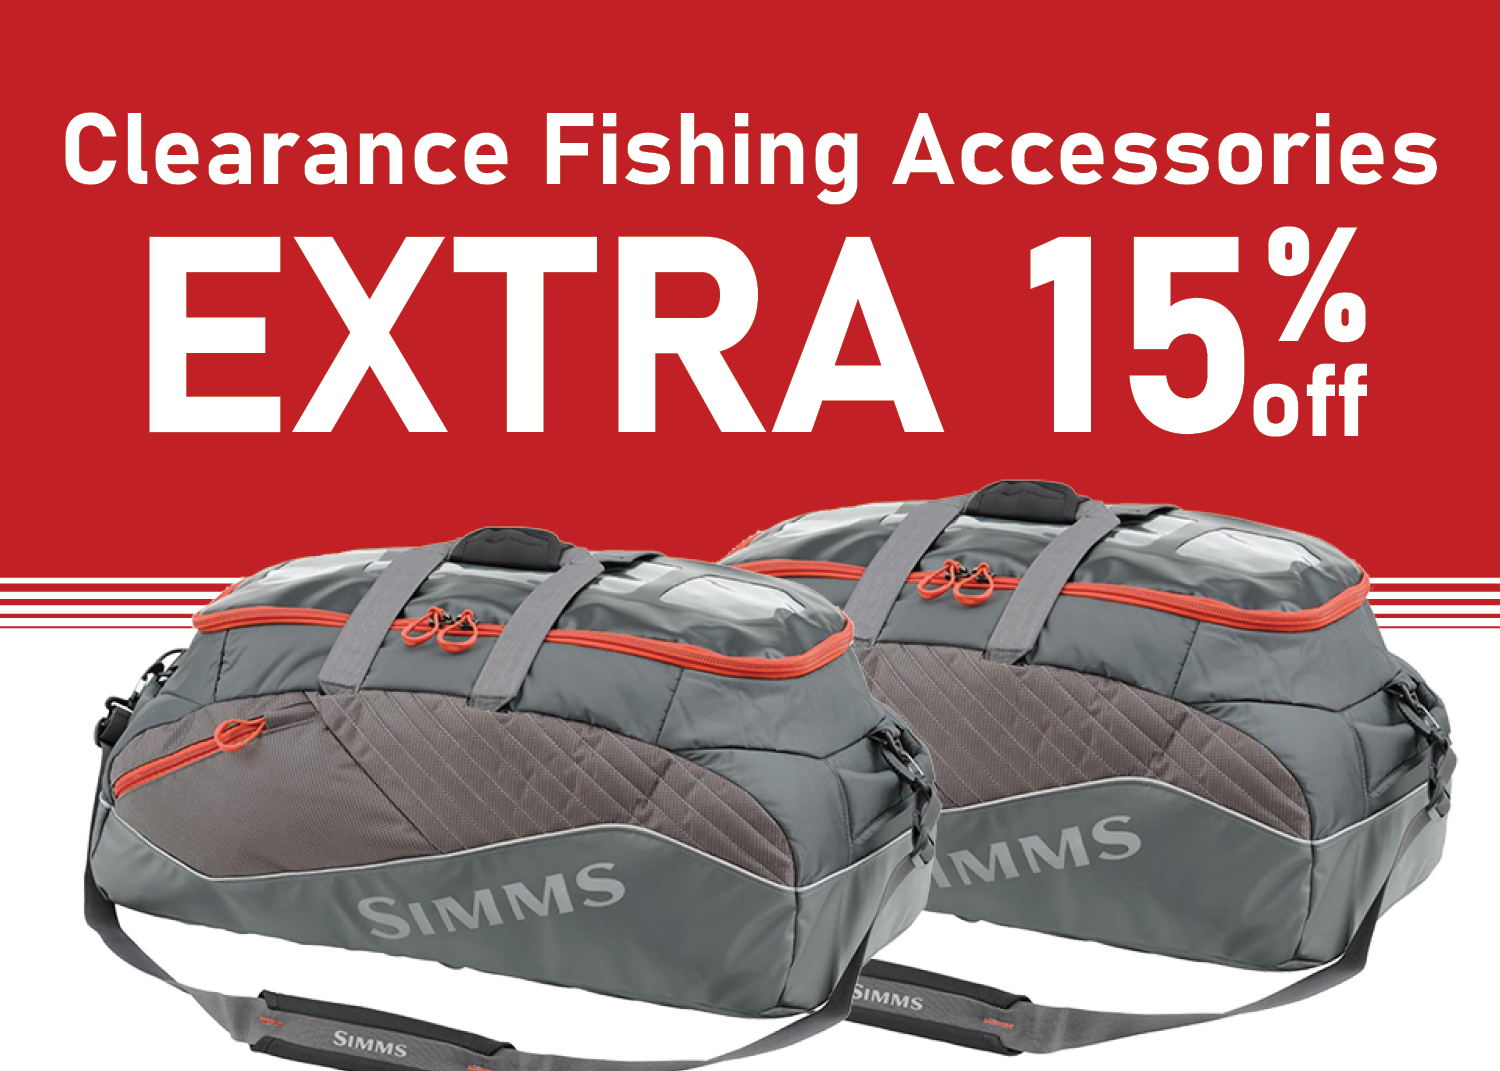 Save an EXTRA 15% on Clearance Fishing Accessories